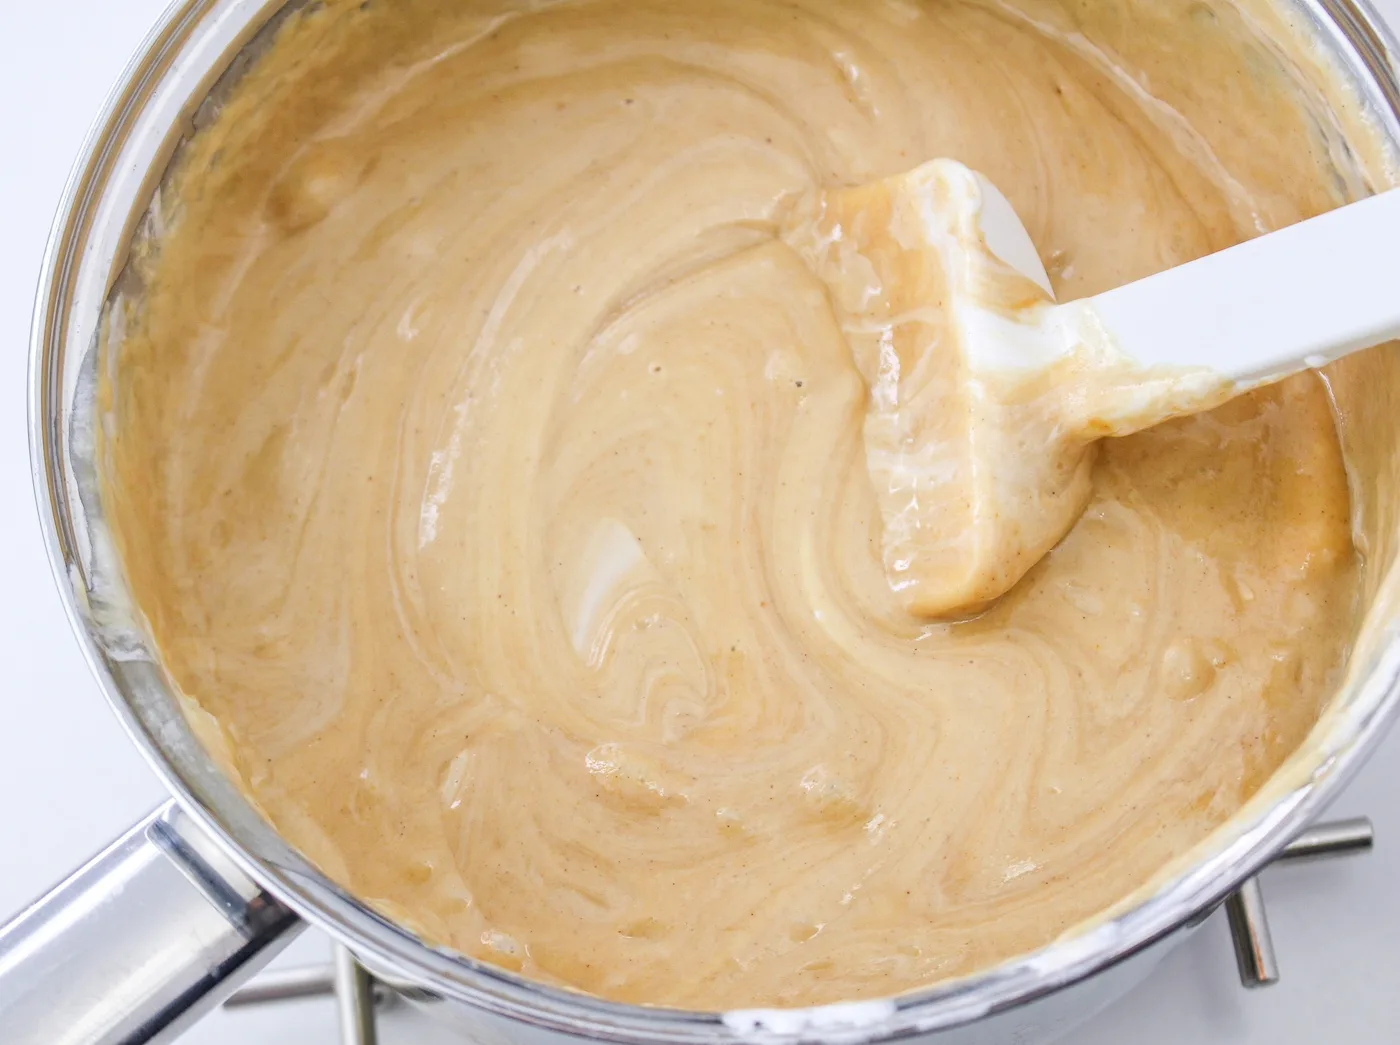 Adding marshmallow creme and peanut butter to the mixture